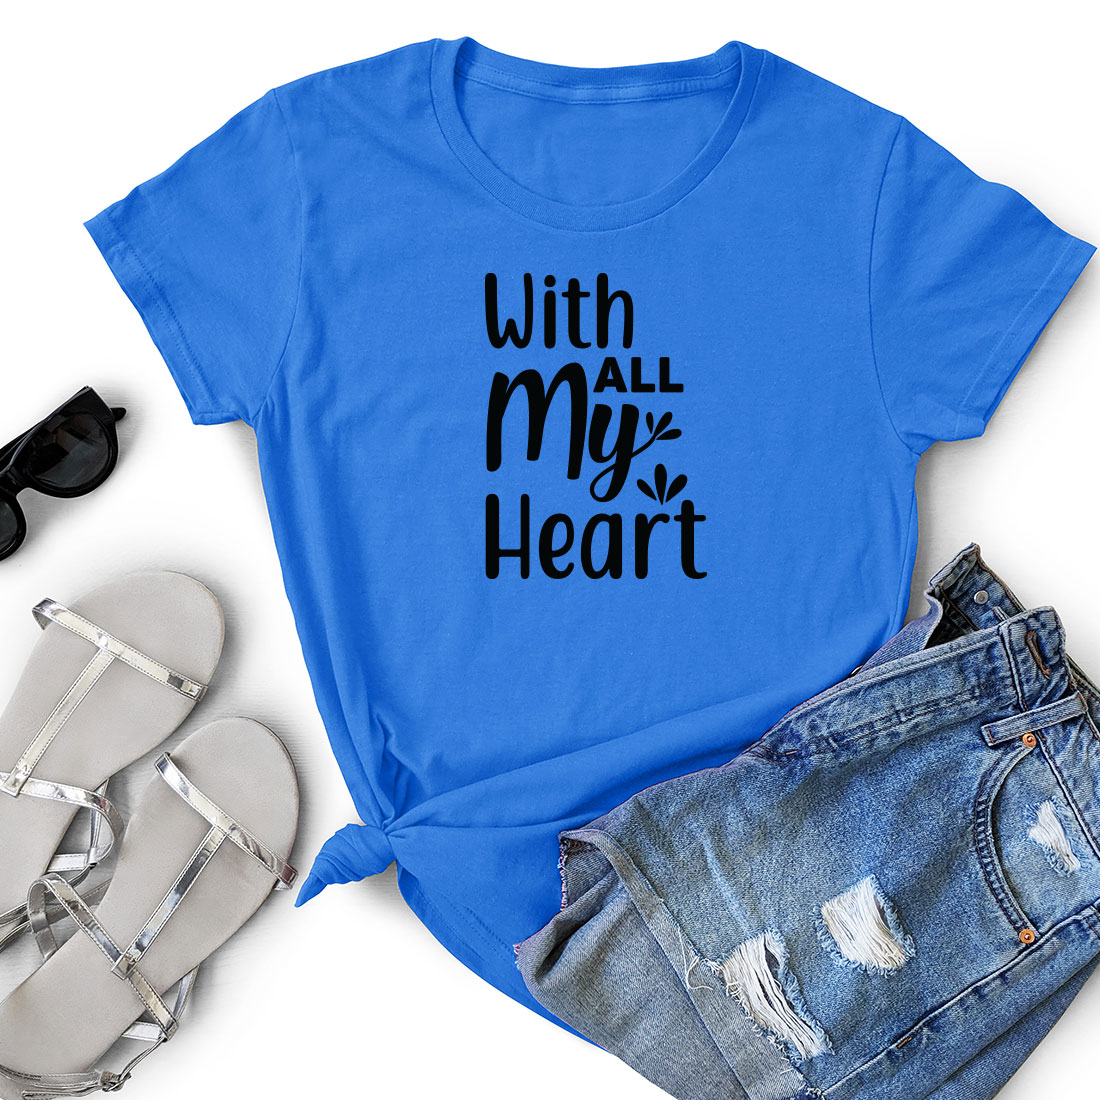 T - shirt that says with all my heart next to a pair of shorts.